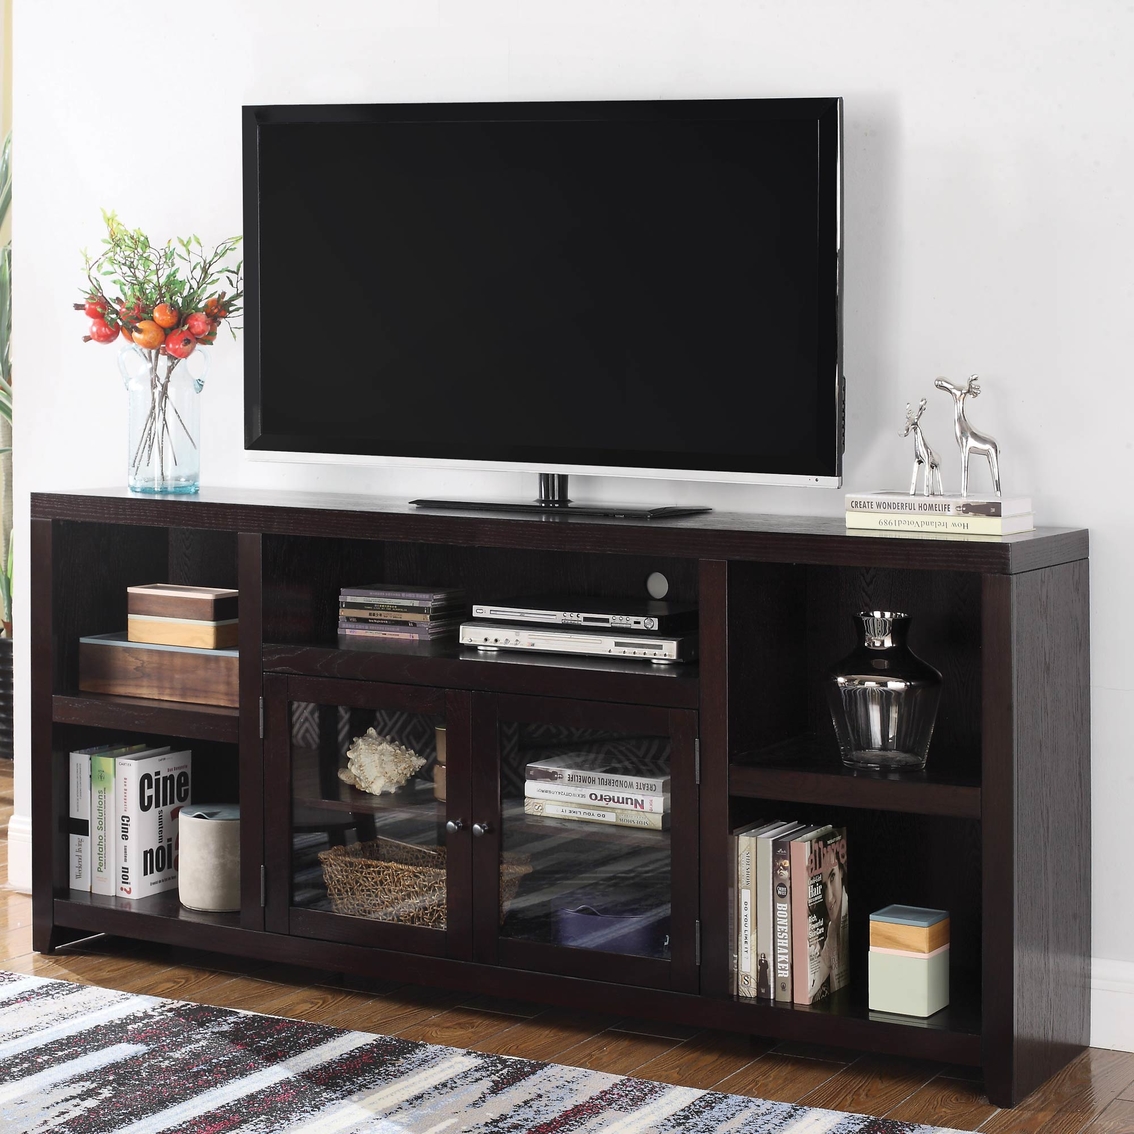 Scott Living Breckinridge Transitional TV Console with Glass Doors - Image 2 of 2